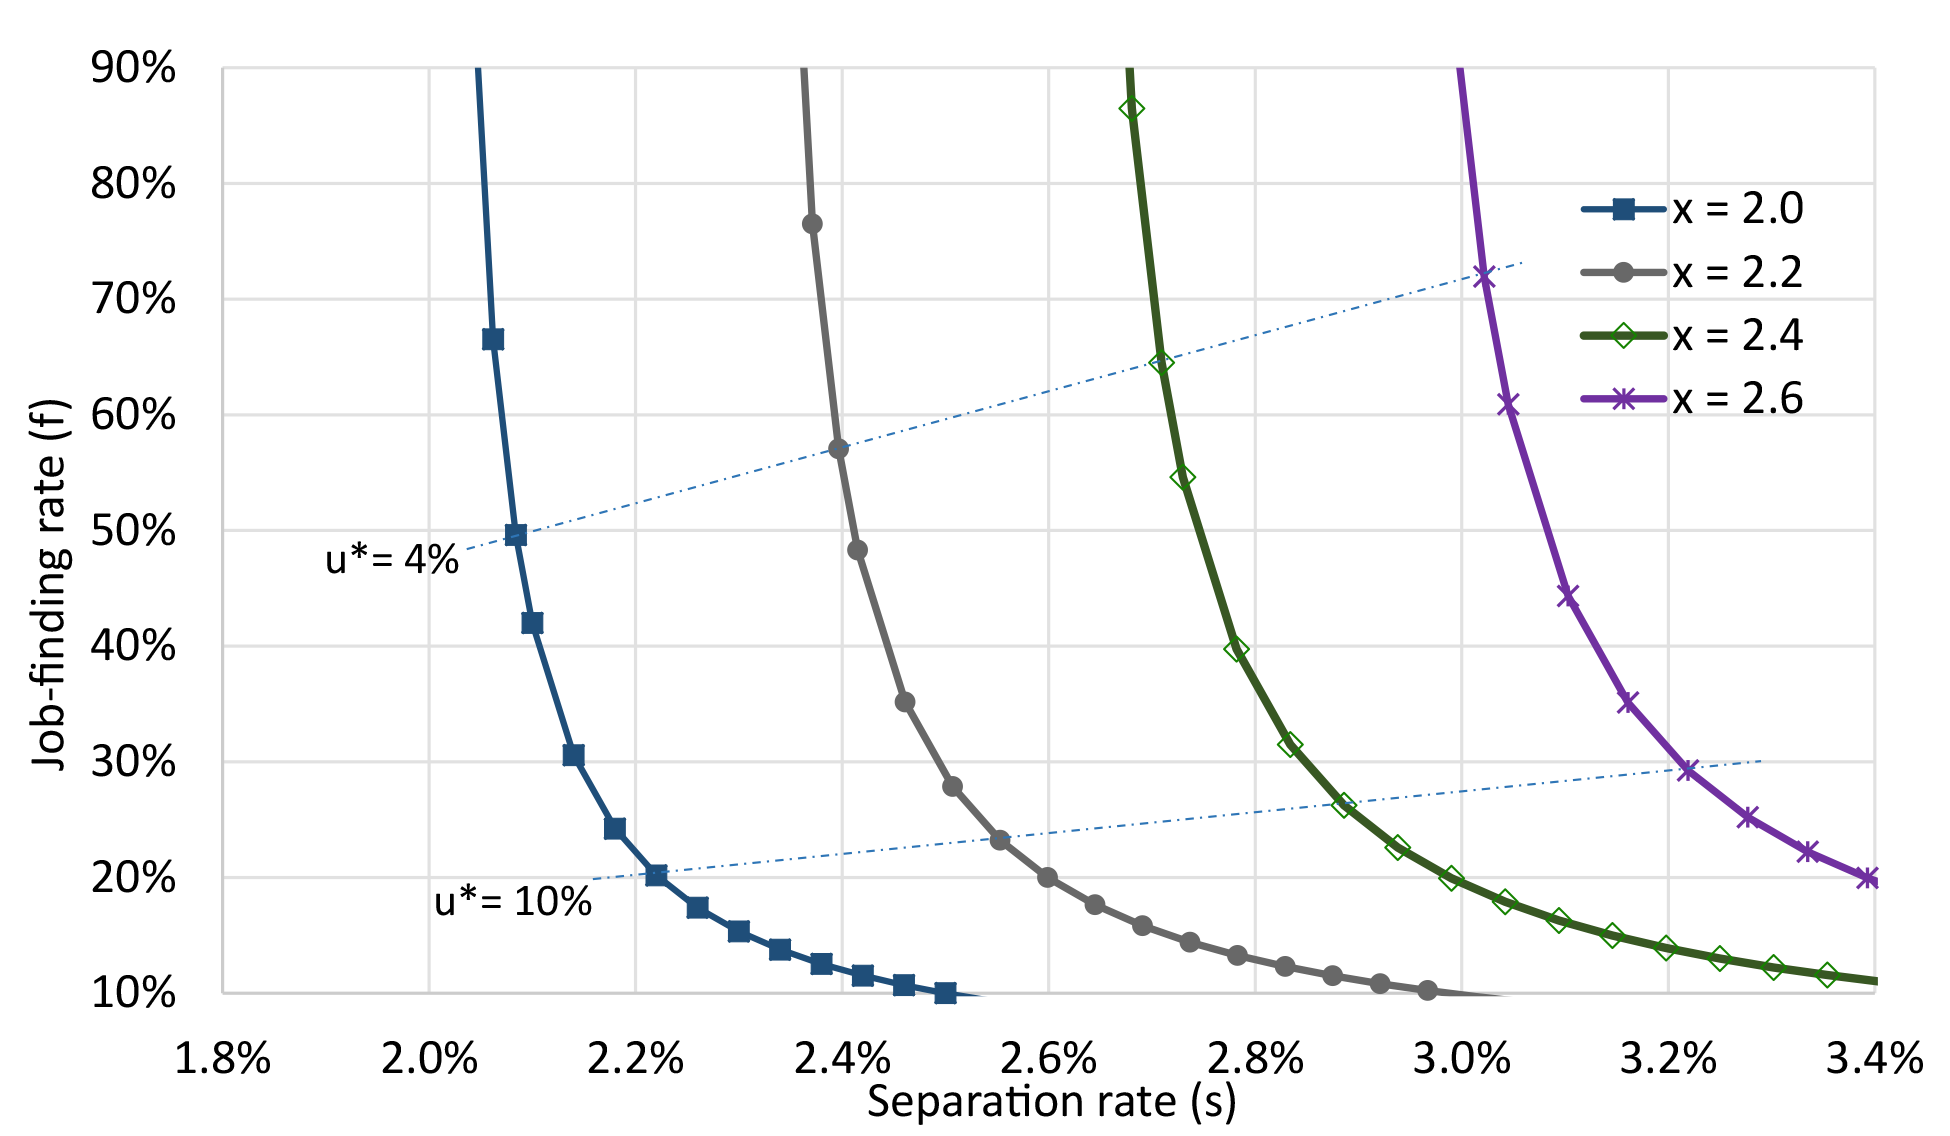 Chart 1: Equilibrium Unemployment Rates in Four 'Job Reallocation' Scenarios. See accessible link for data.